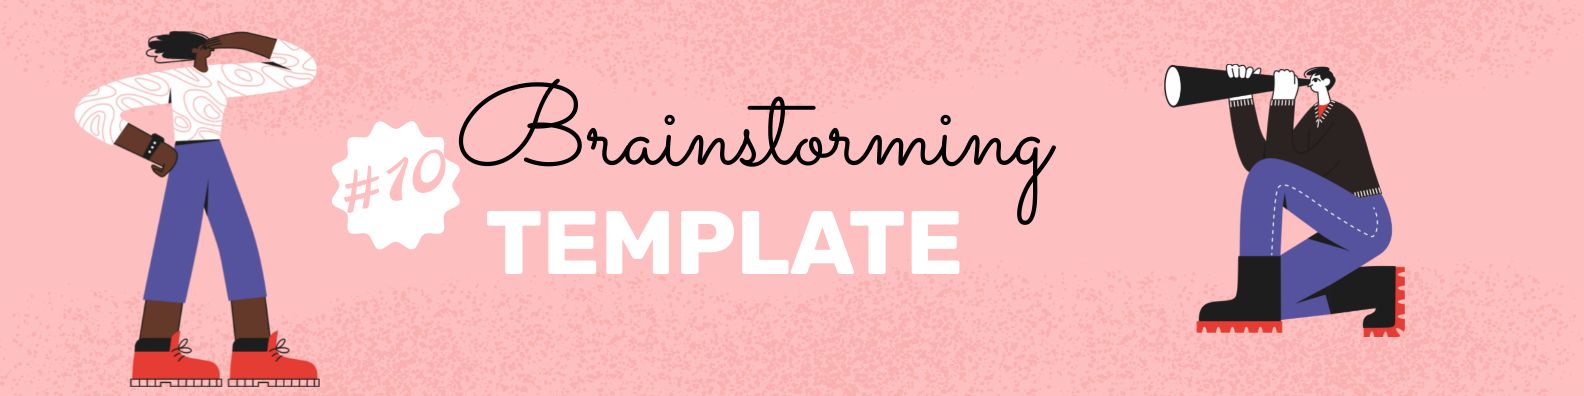 people are searching for brainstorming templates 10 